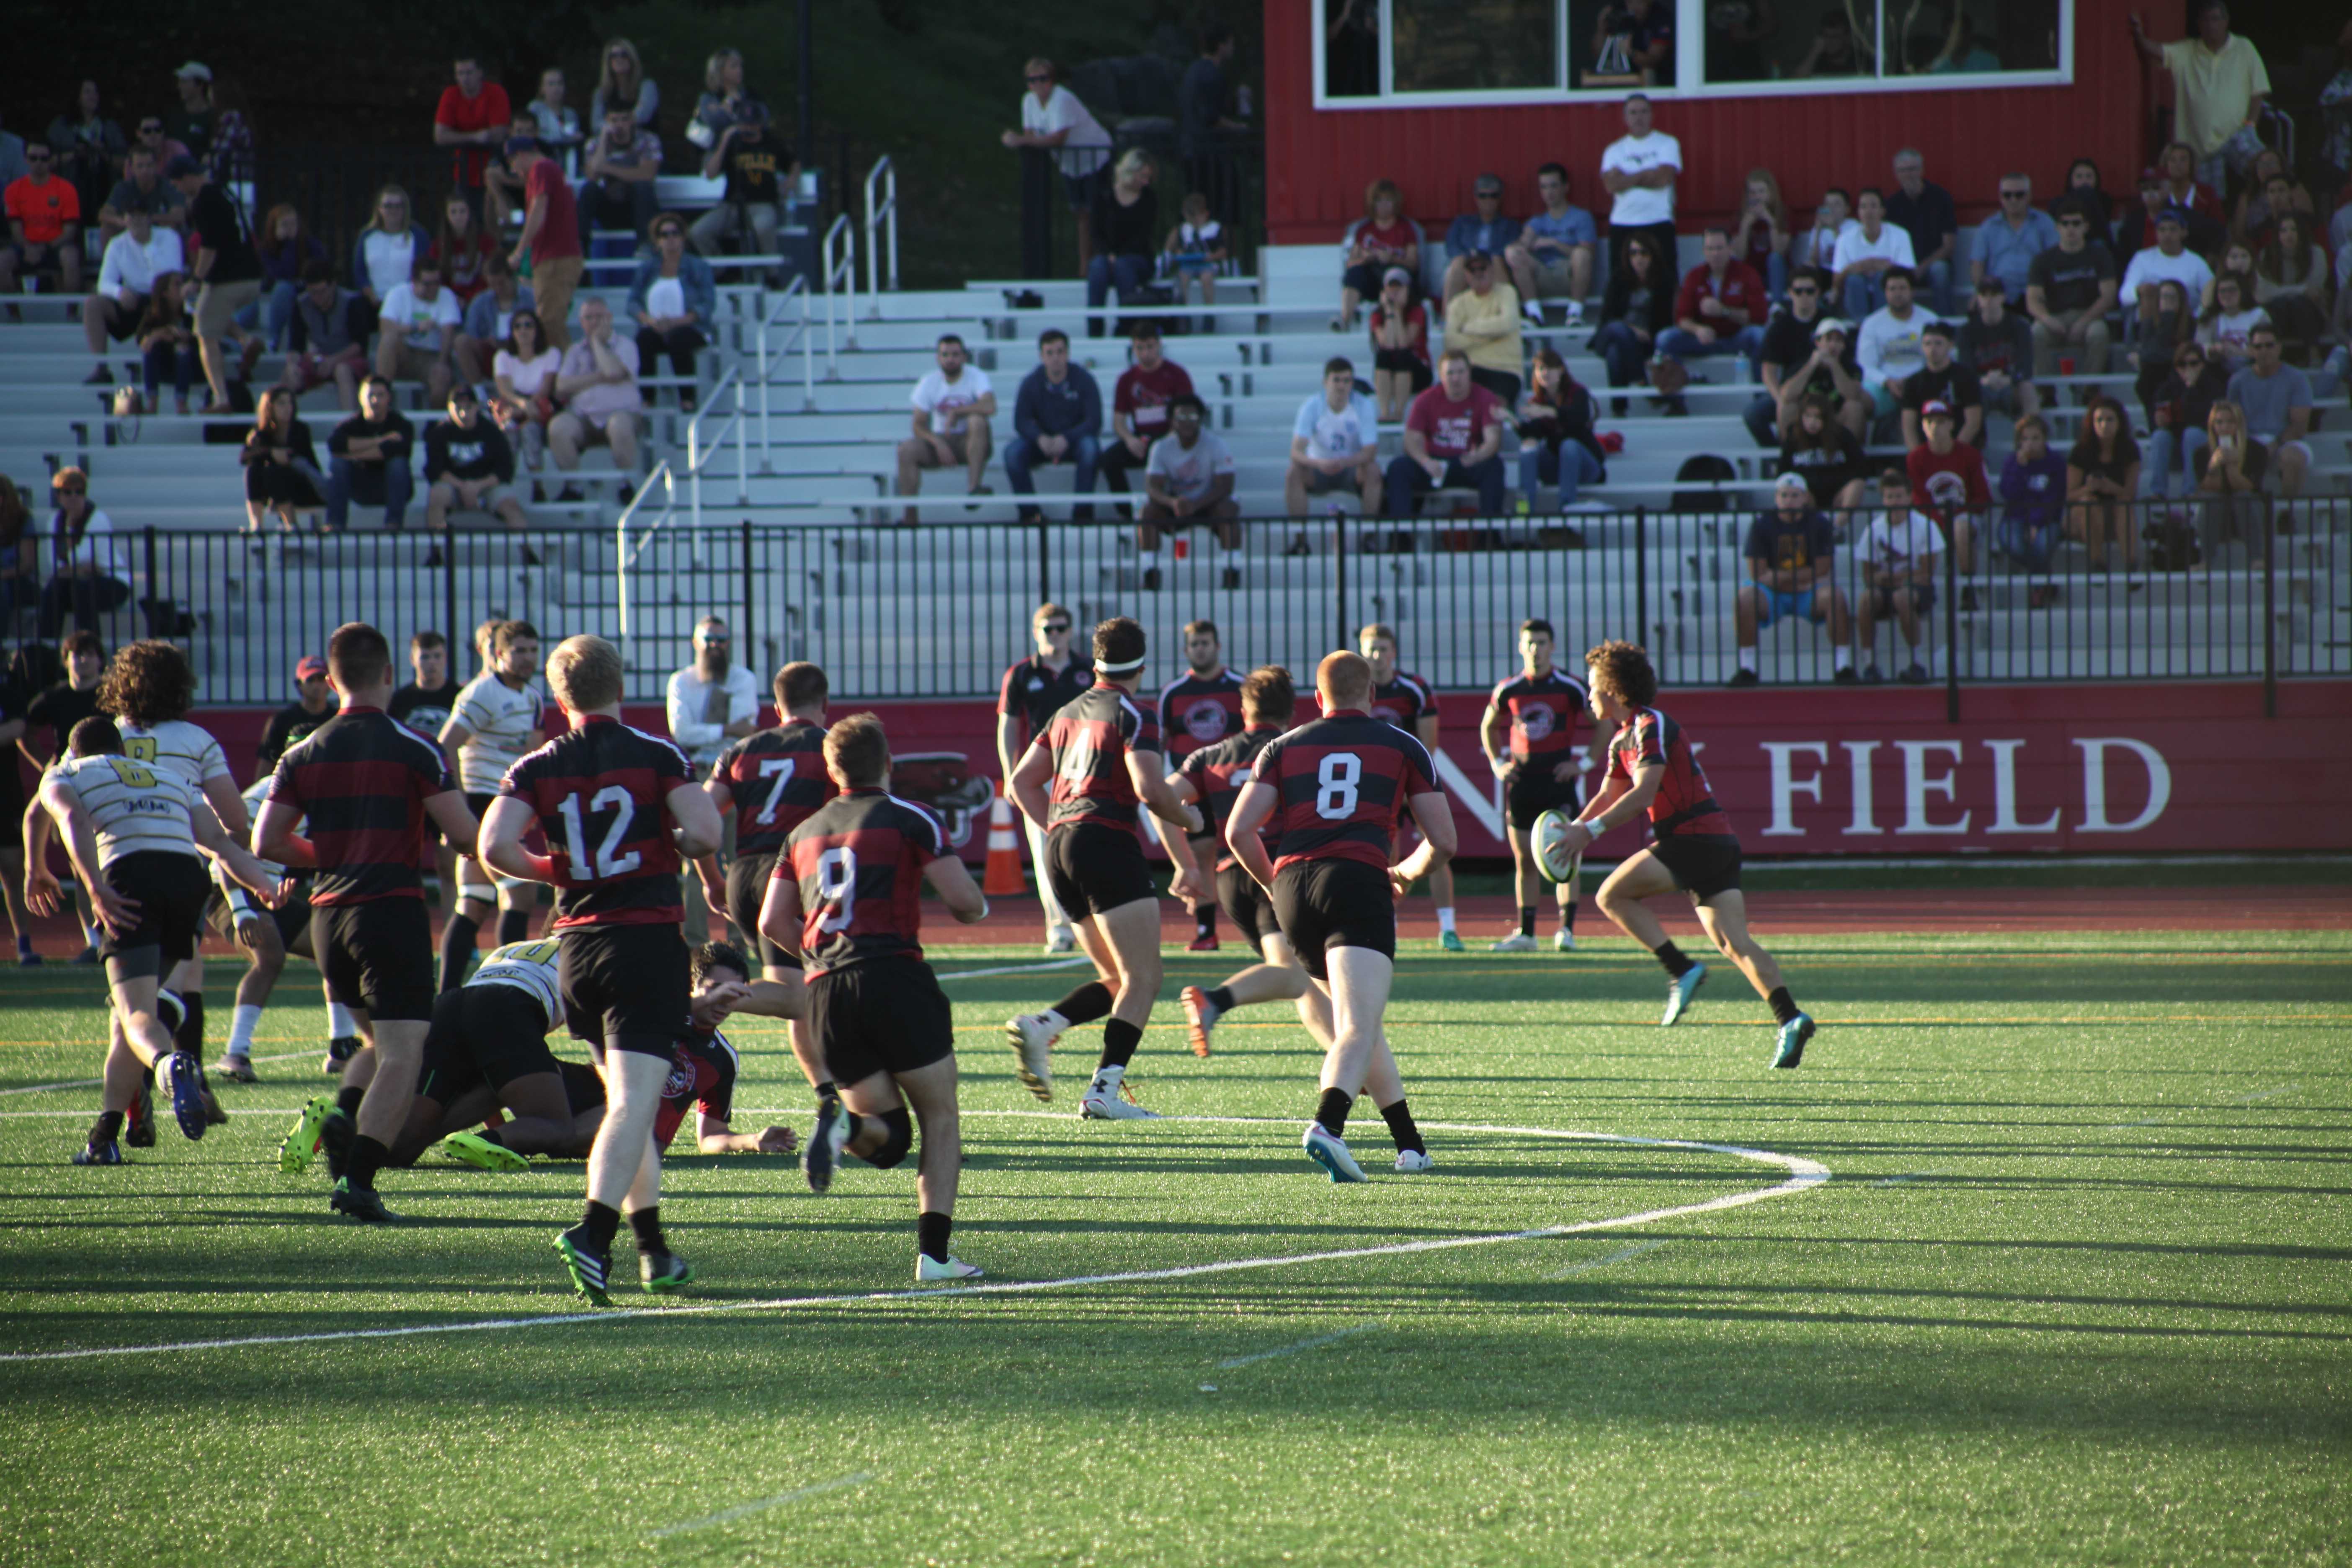 Men's rugby takes on Millersville University on Sept. 24 (Photo by Mariel Berger, '19)